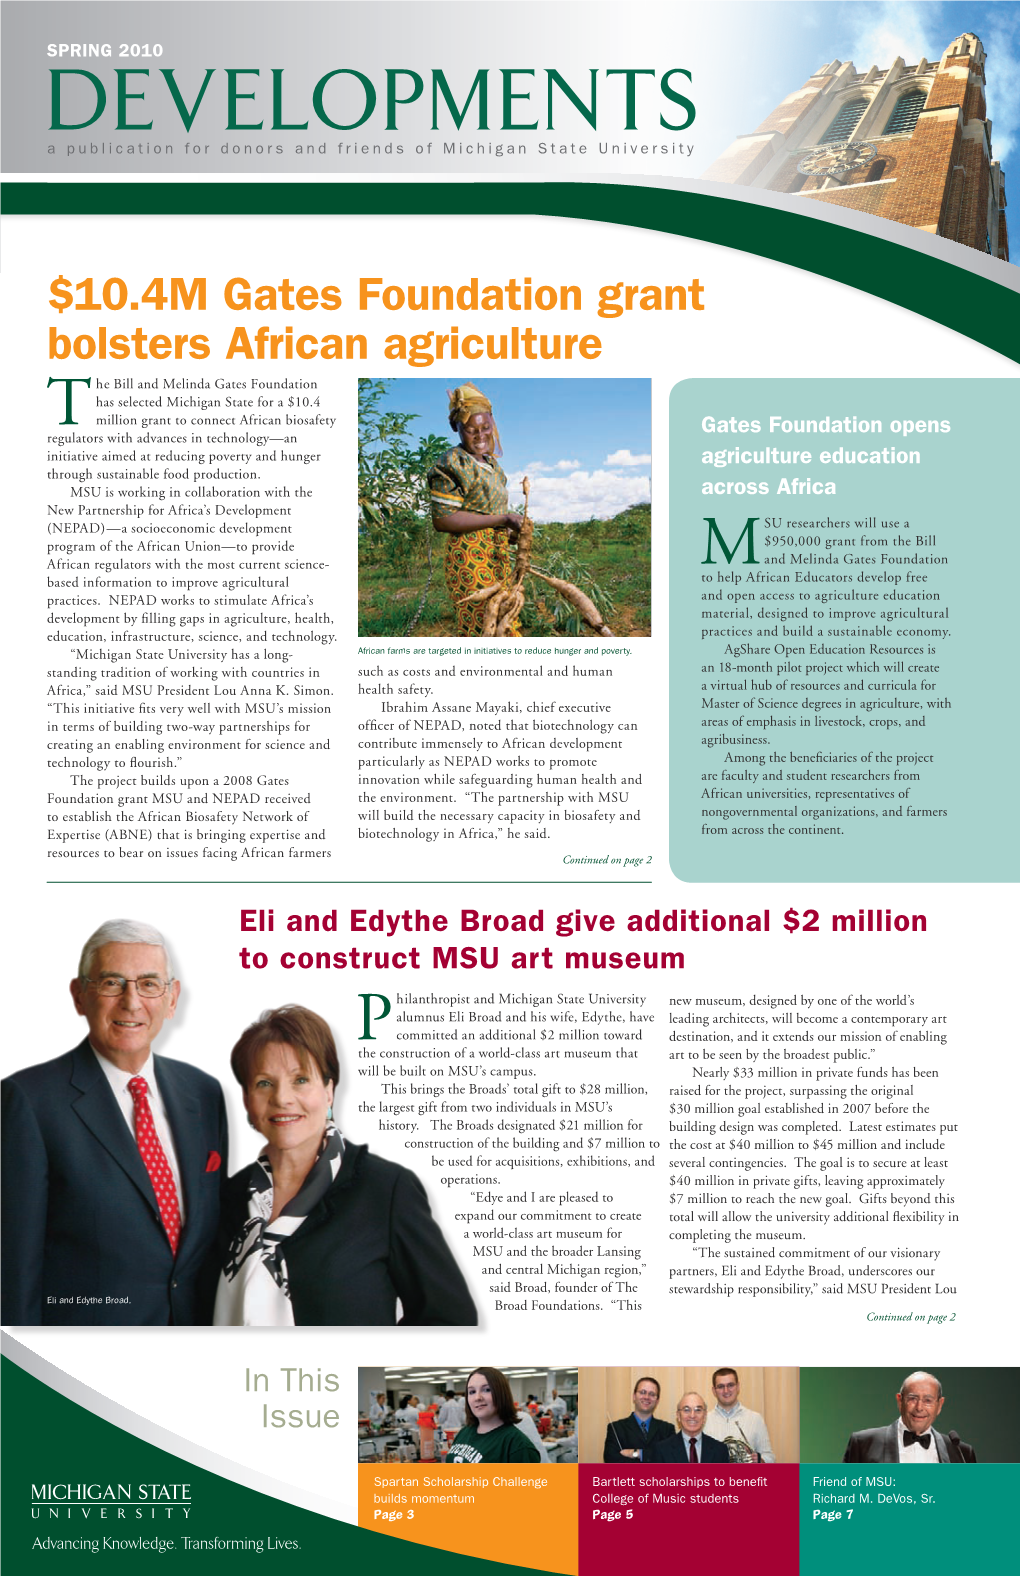 $10.4M Gates Foundation Grant Bolsters African Agriculture